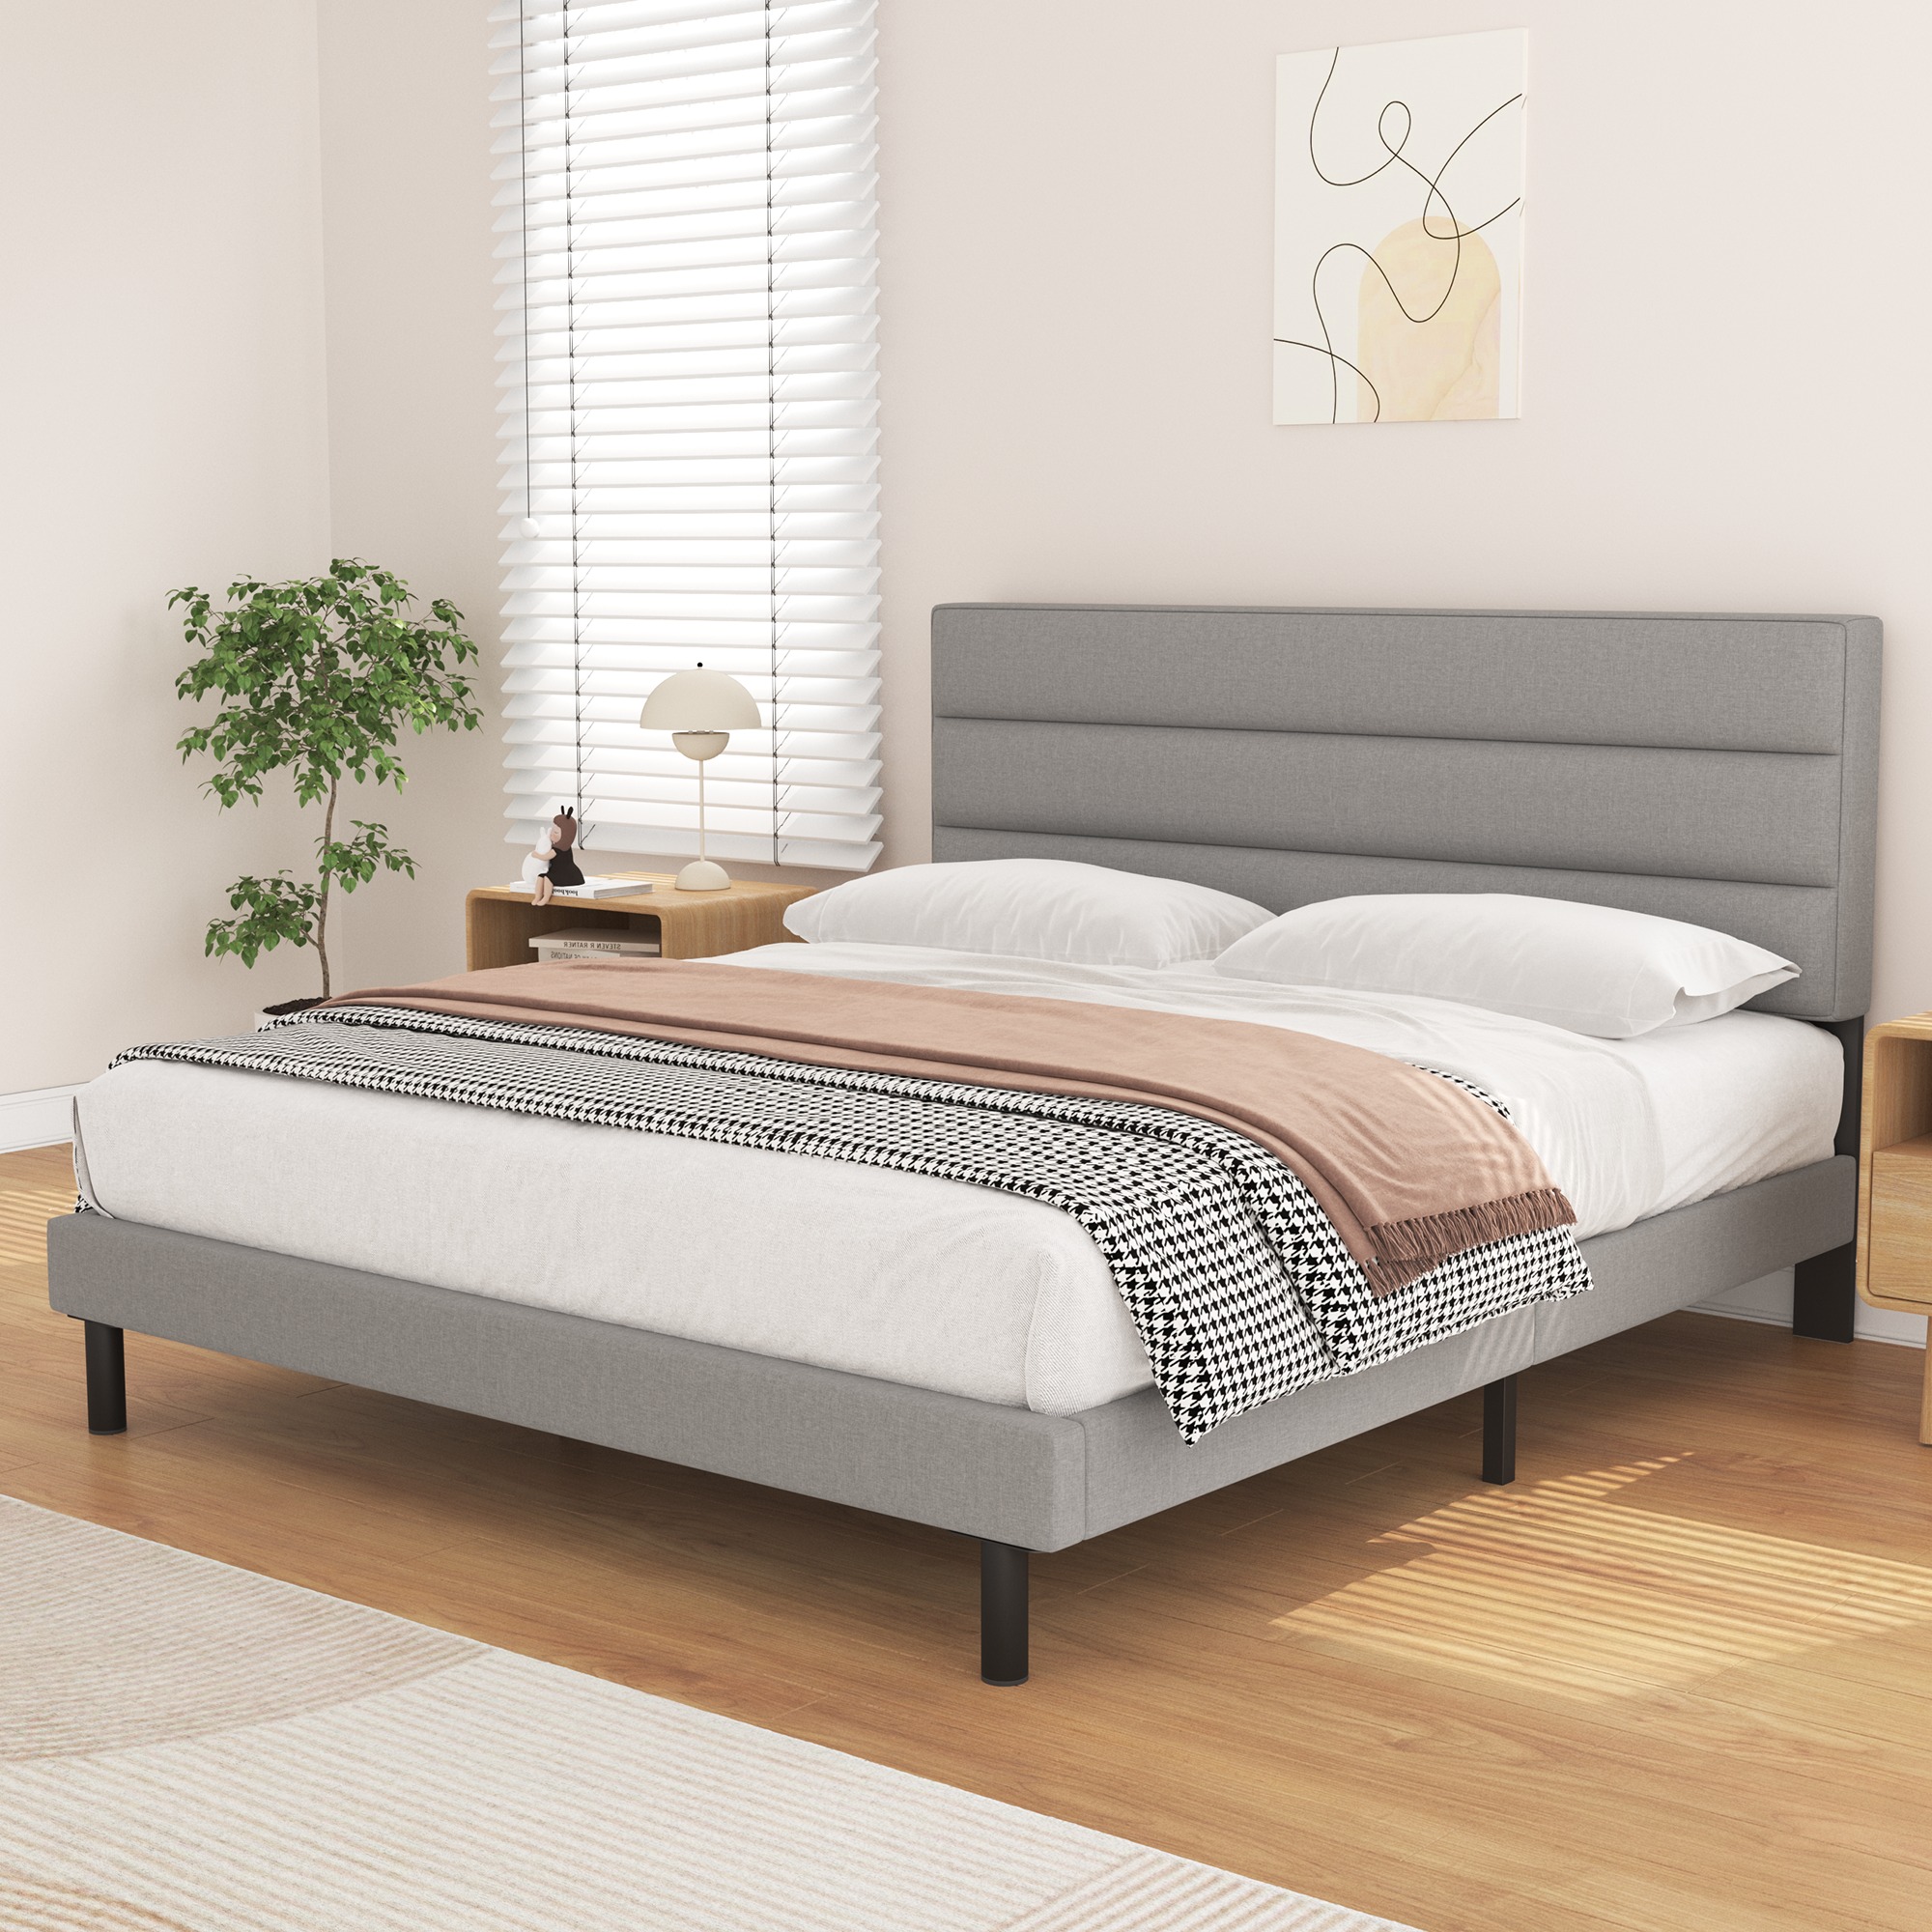 Queen Bed Frame, HAIIDE Queen Size Platform Bed with Wingback Fabric Upholstered Headboard, Light Gray - image 3 of 8